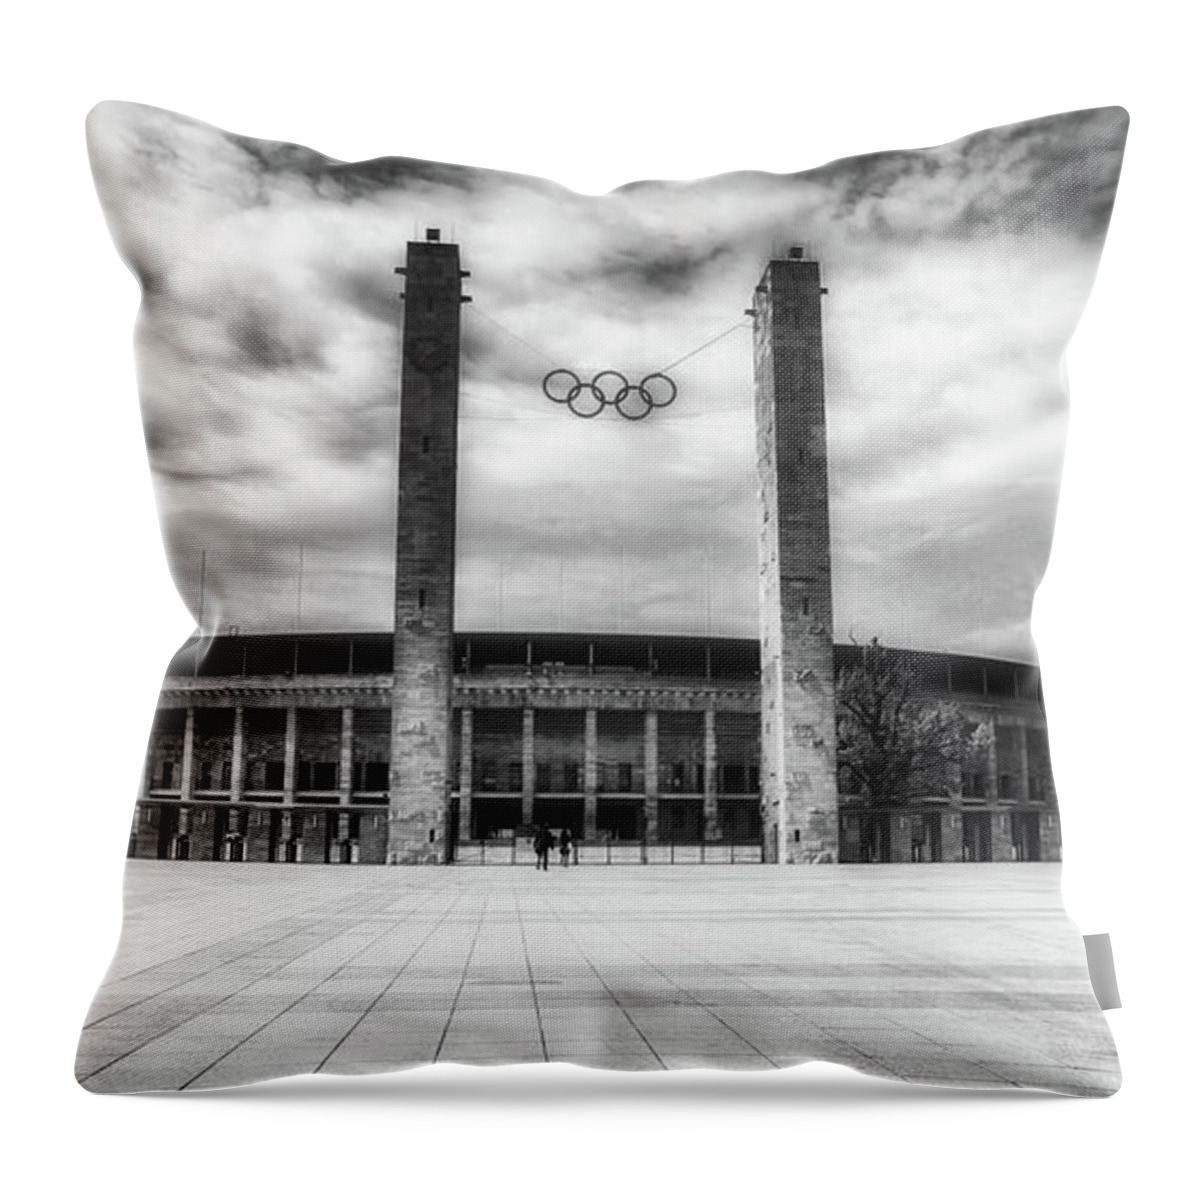 Olympic Stadium Throw Pillow featuring the photograph The Olympic Stadium Of Berlin by Mountain Dreams